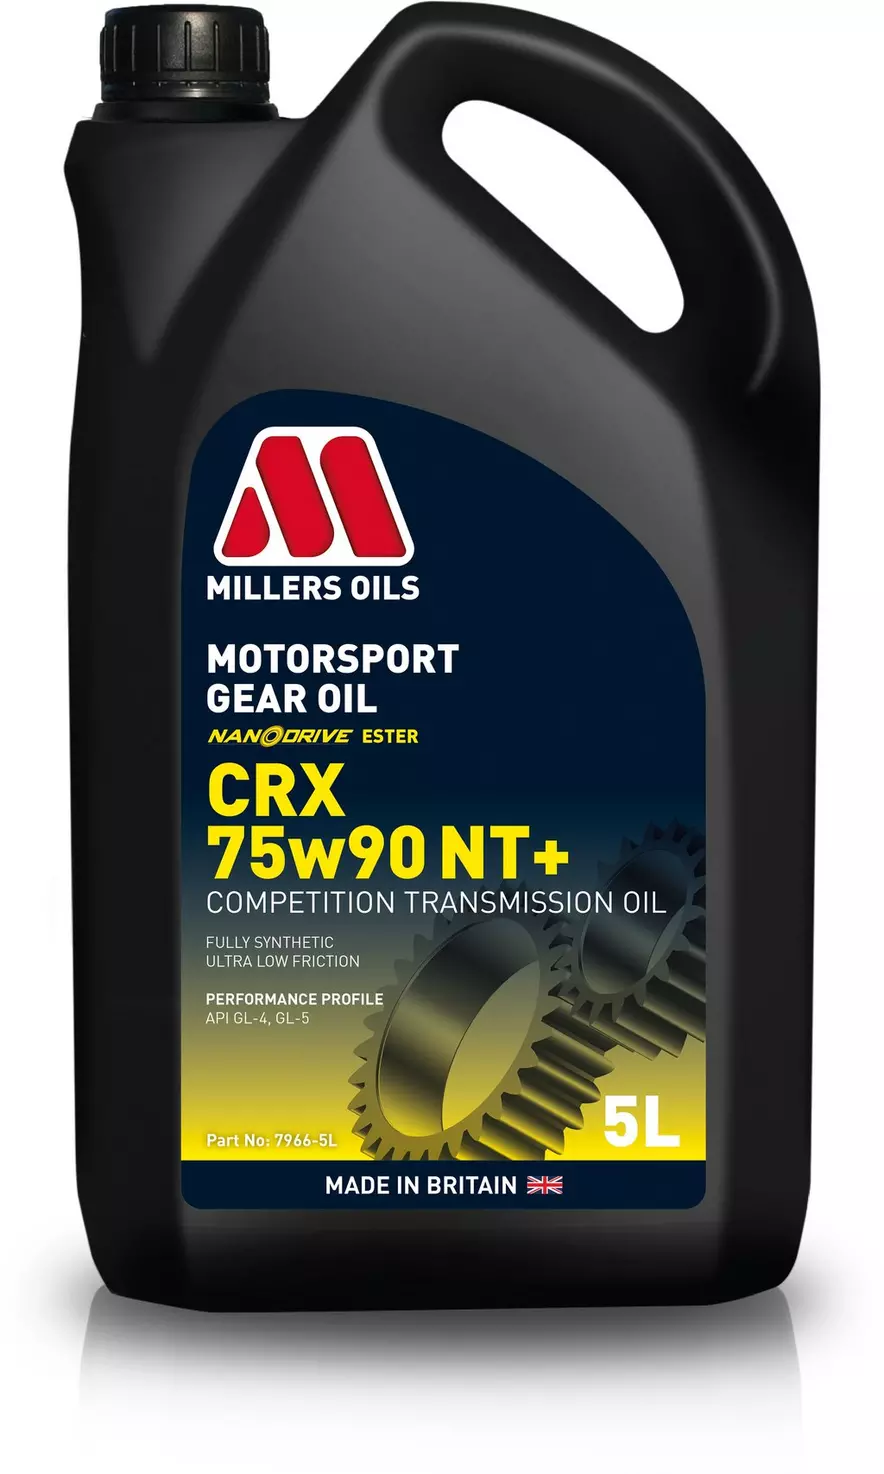 Millers Oils CRX 75w90 NT+ Competition fully synthetic transmission oil.